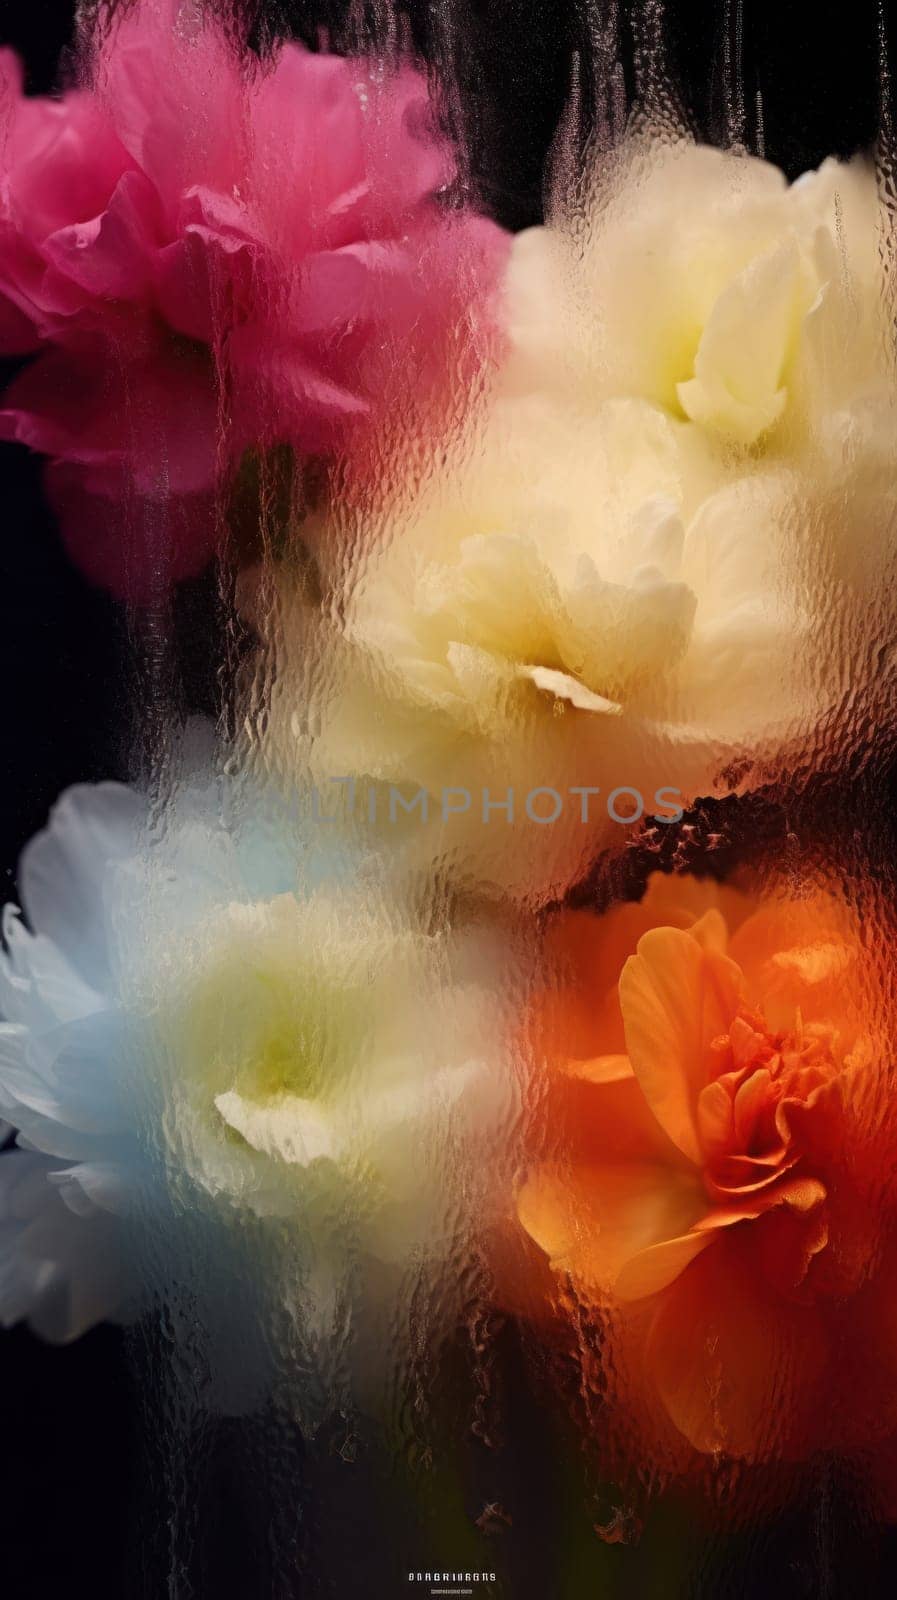 Background of blooming flowers in front of glass with water drops Stock Photo by nijieimu